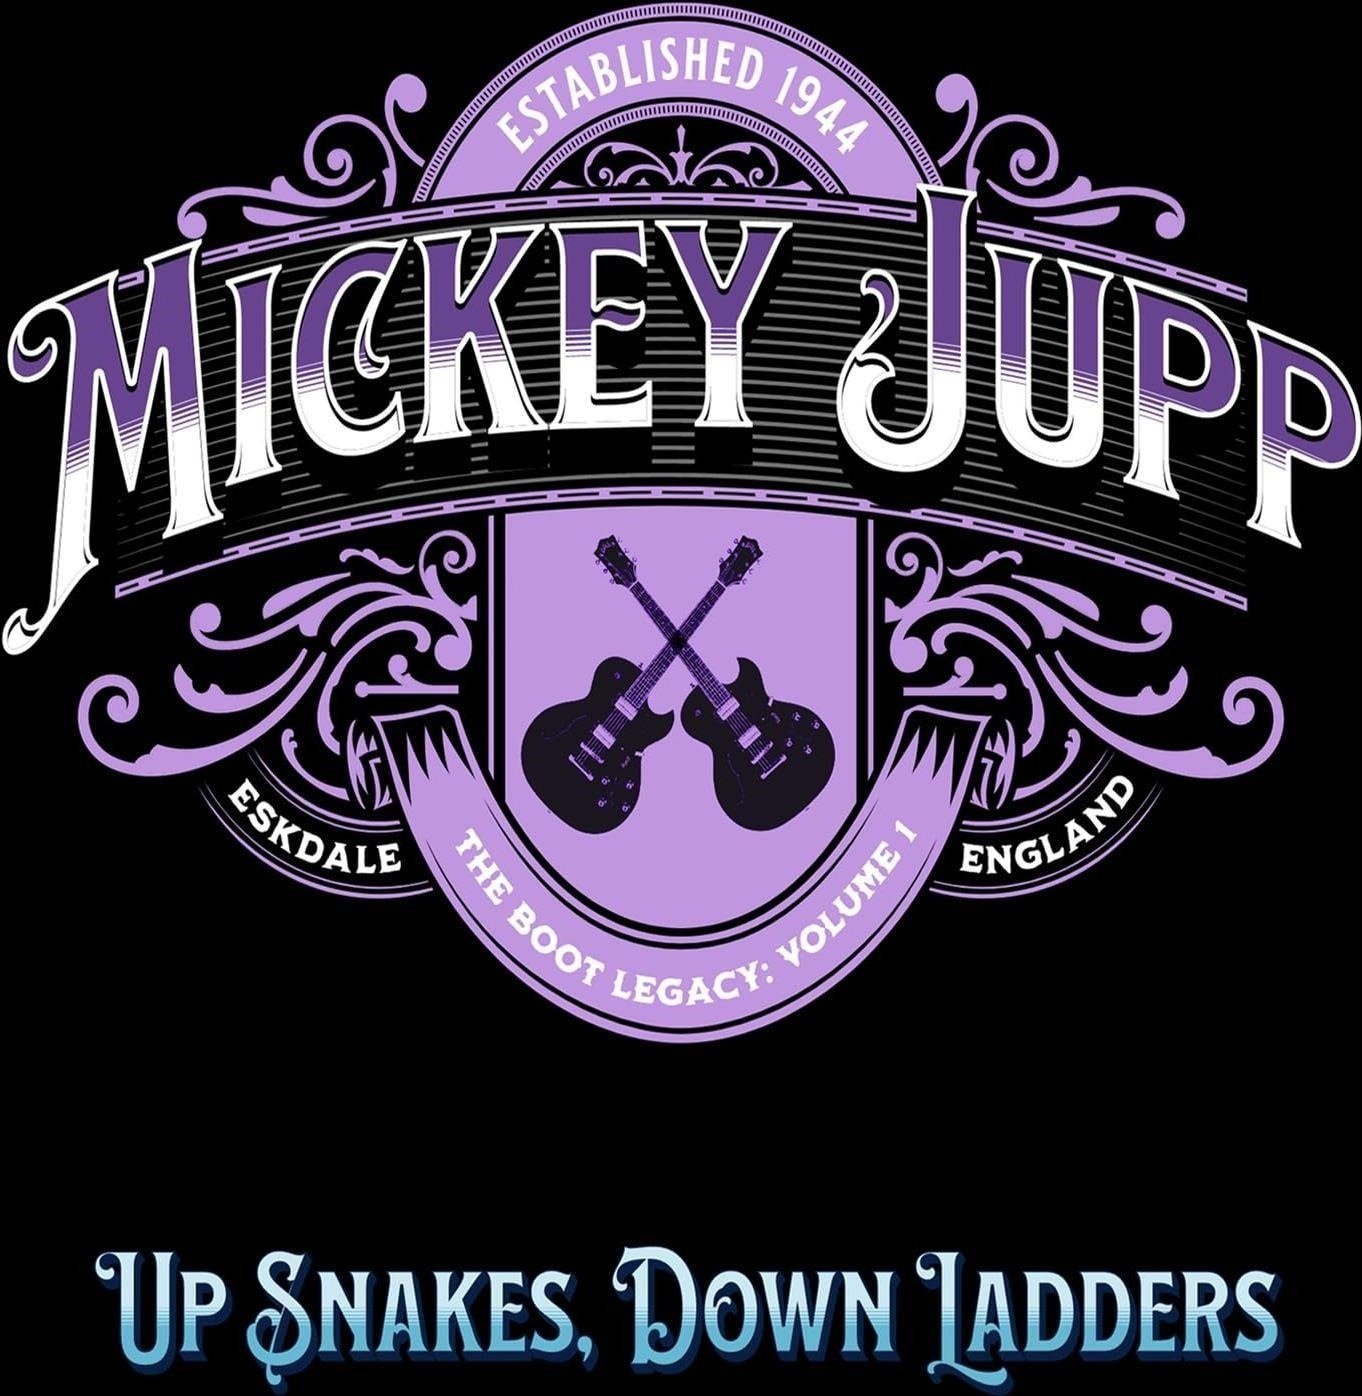 CD Shop - JUPP, MICKEY UP SNAKES, DOWN LADDERS